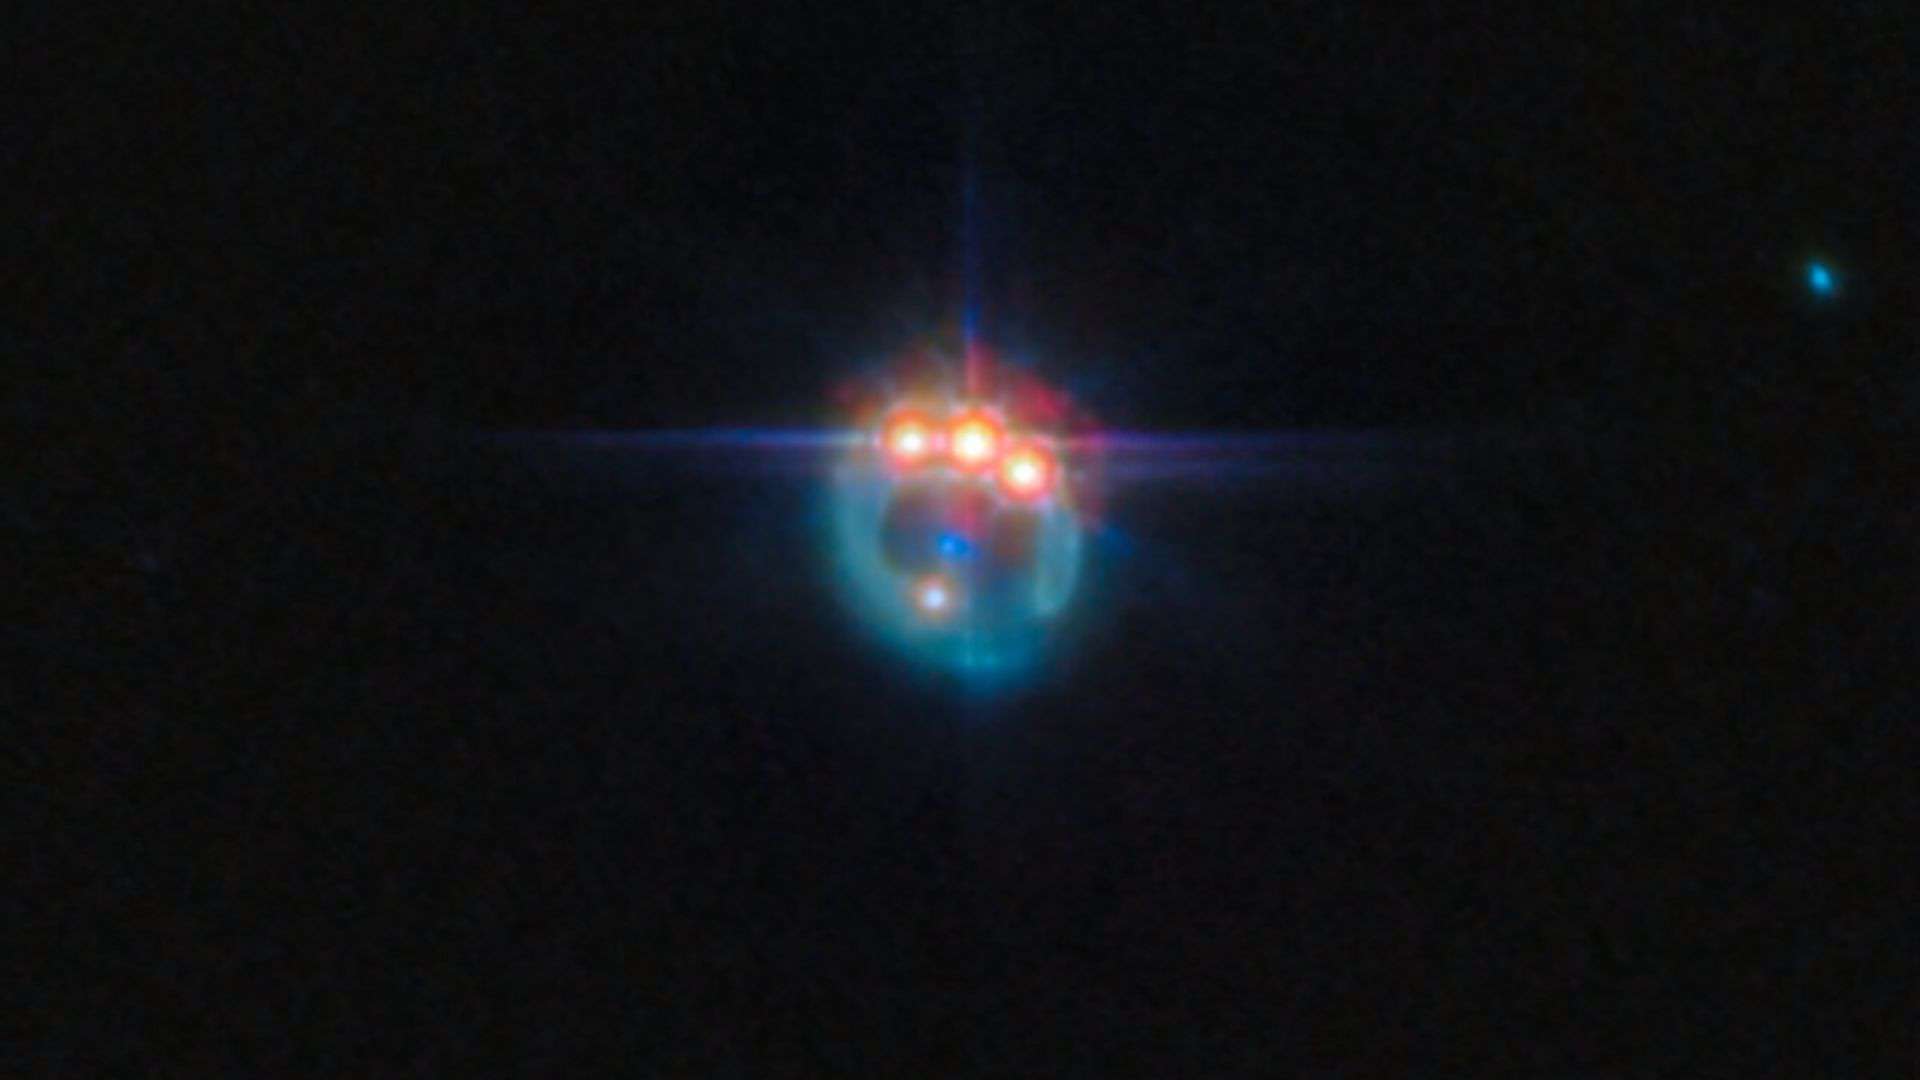 James Webb Space Telescope creates multiple images of the quasar RX J1131-1231 due to the effect of gravitational lensing